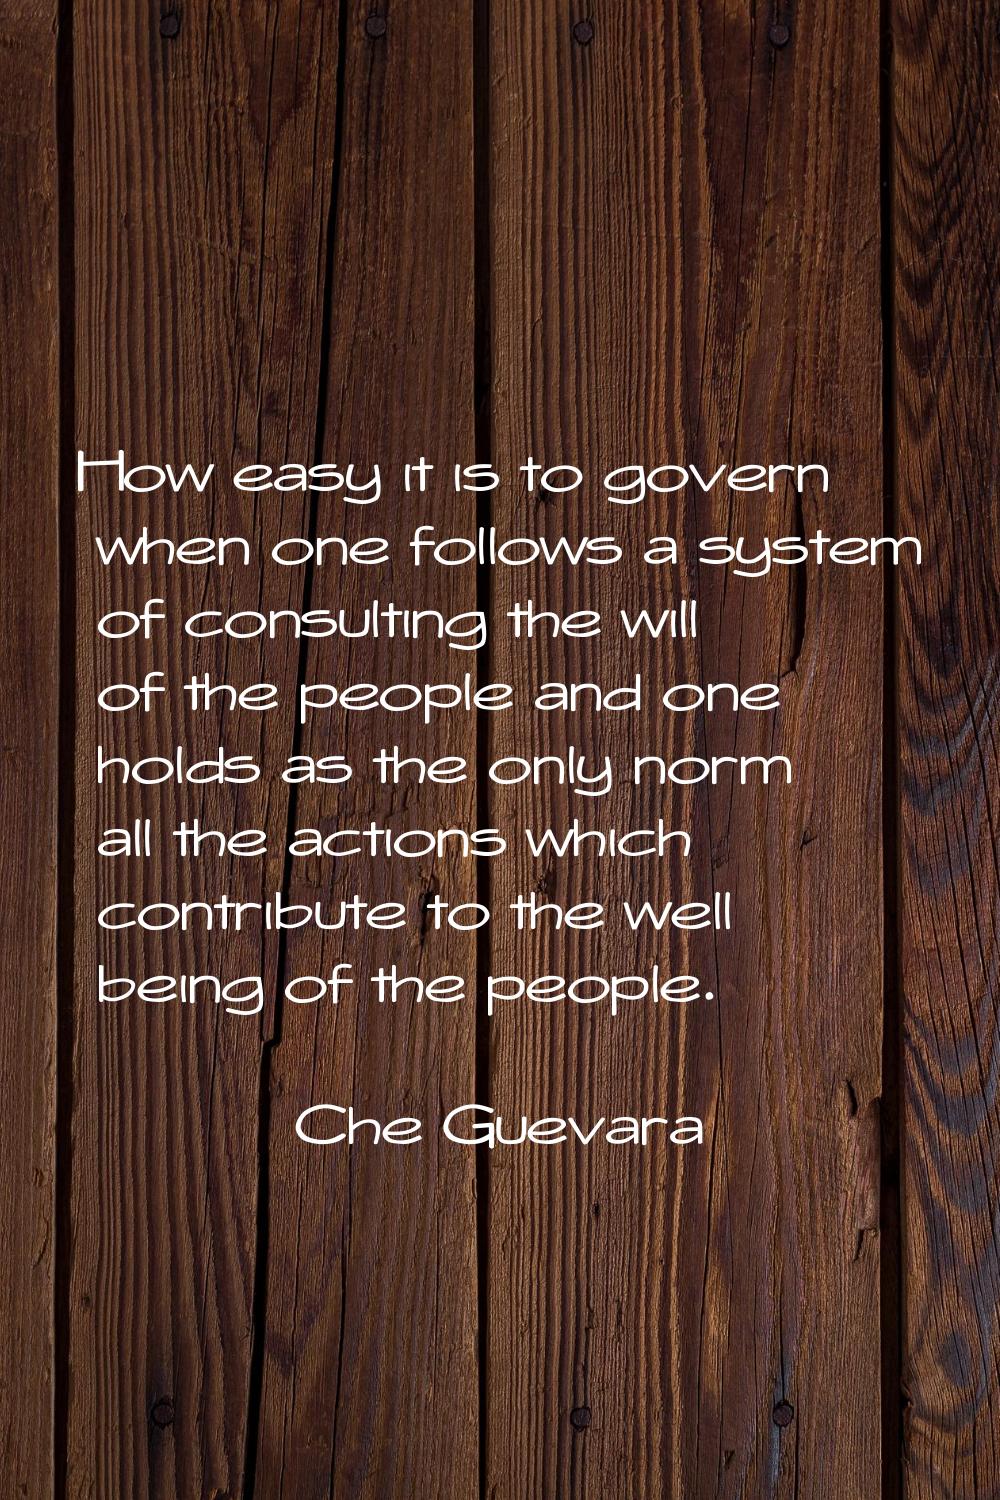 How easy it is to govern when one follows a system of consulting the will of the people and one hol